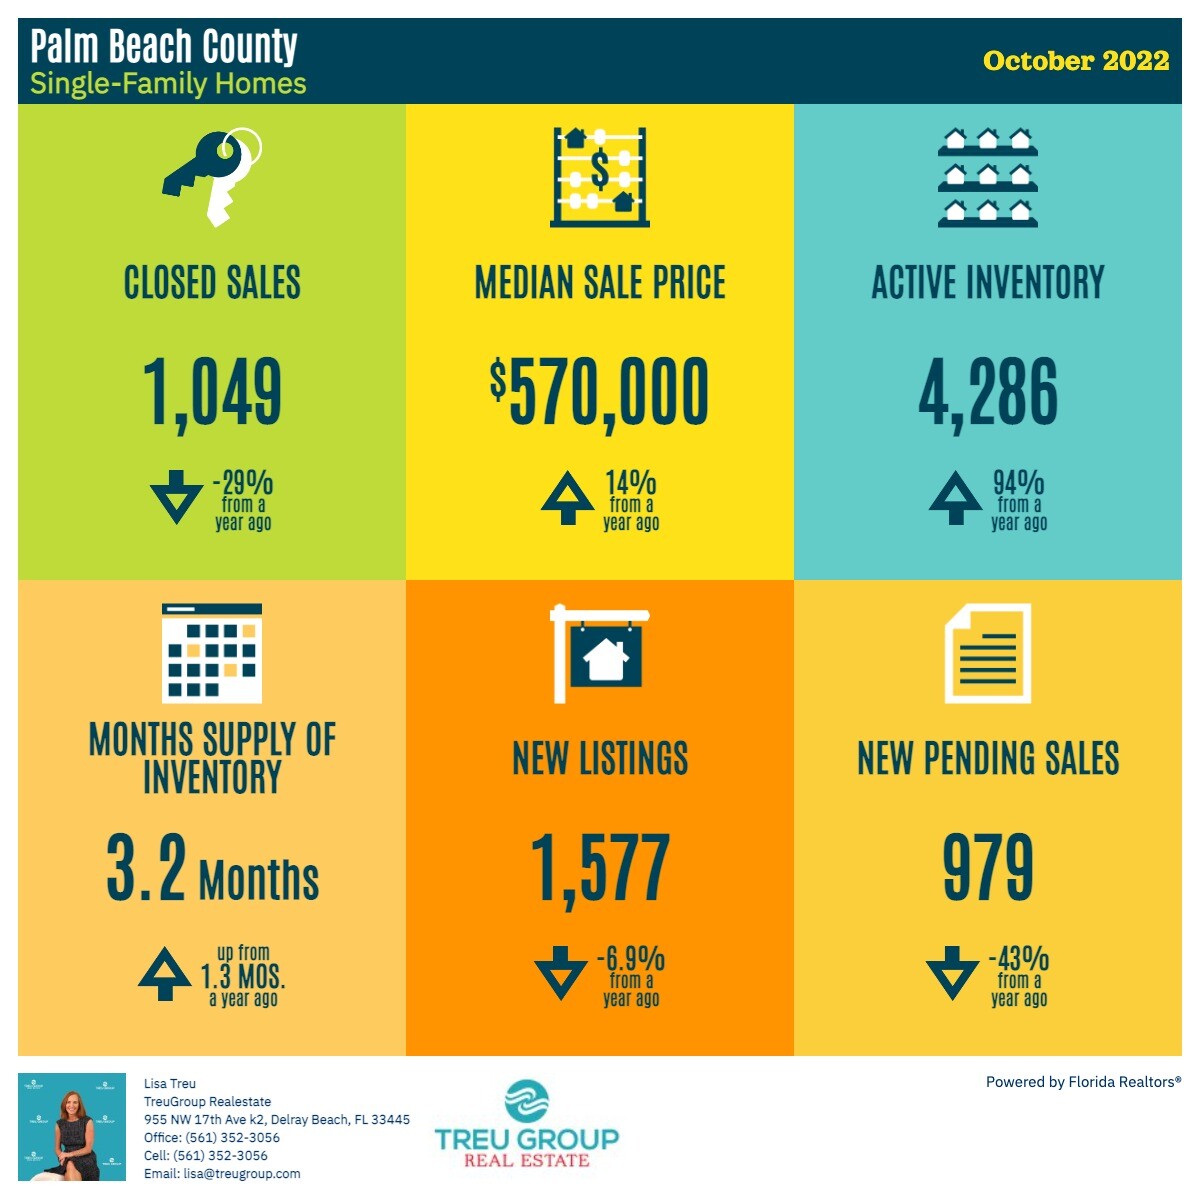 Market Update for Palm Beach County